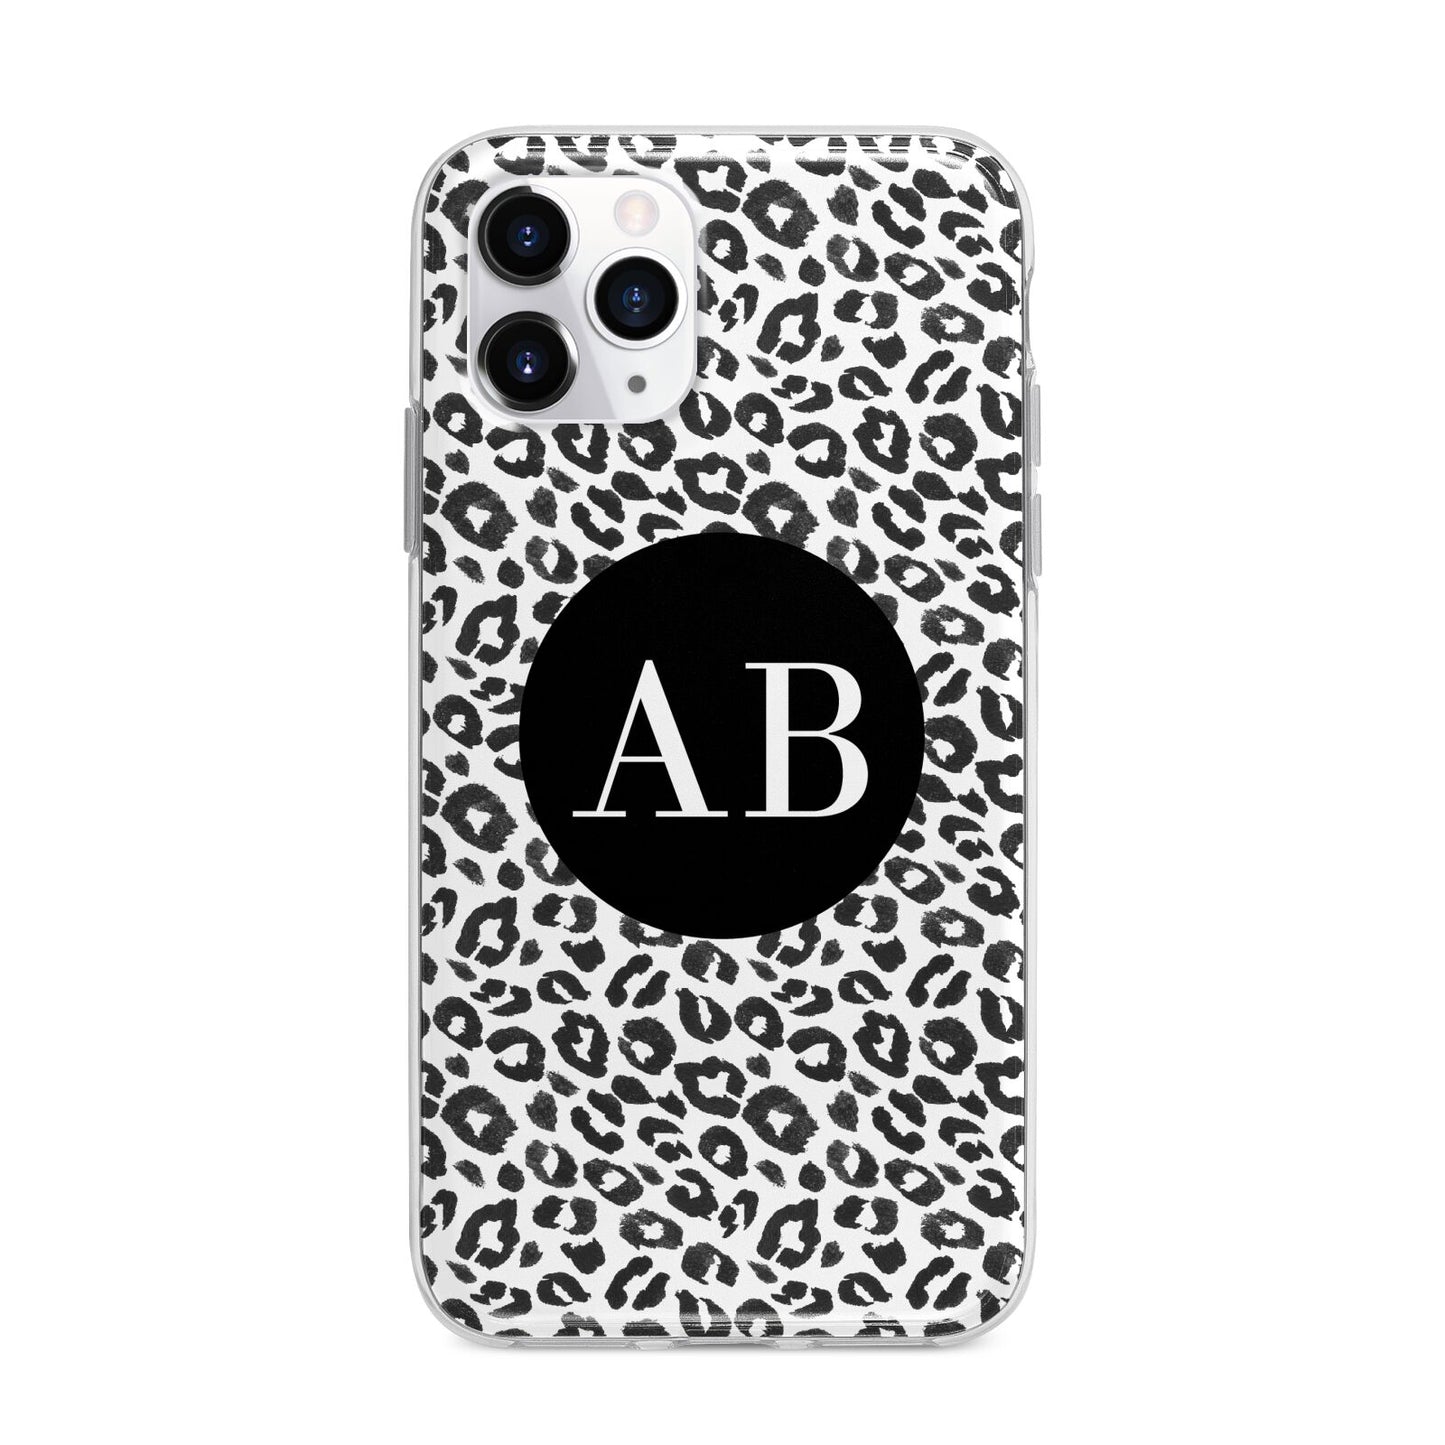 Leopard Print Black and White Apple iPhone 11 Pro Max in Silver with Bumper Case